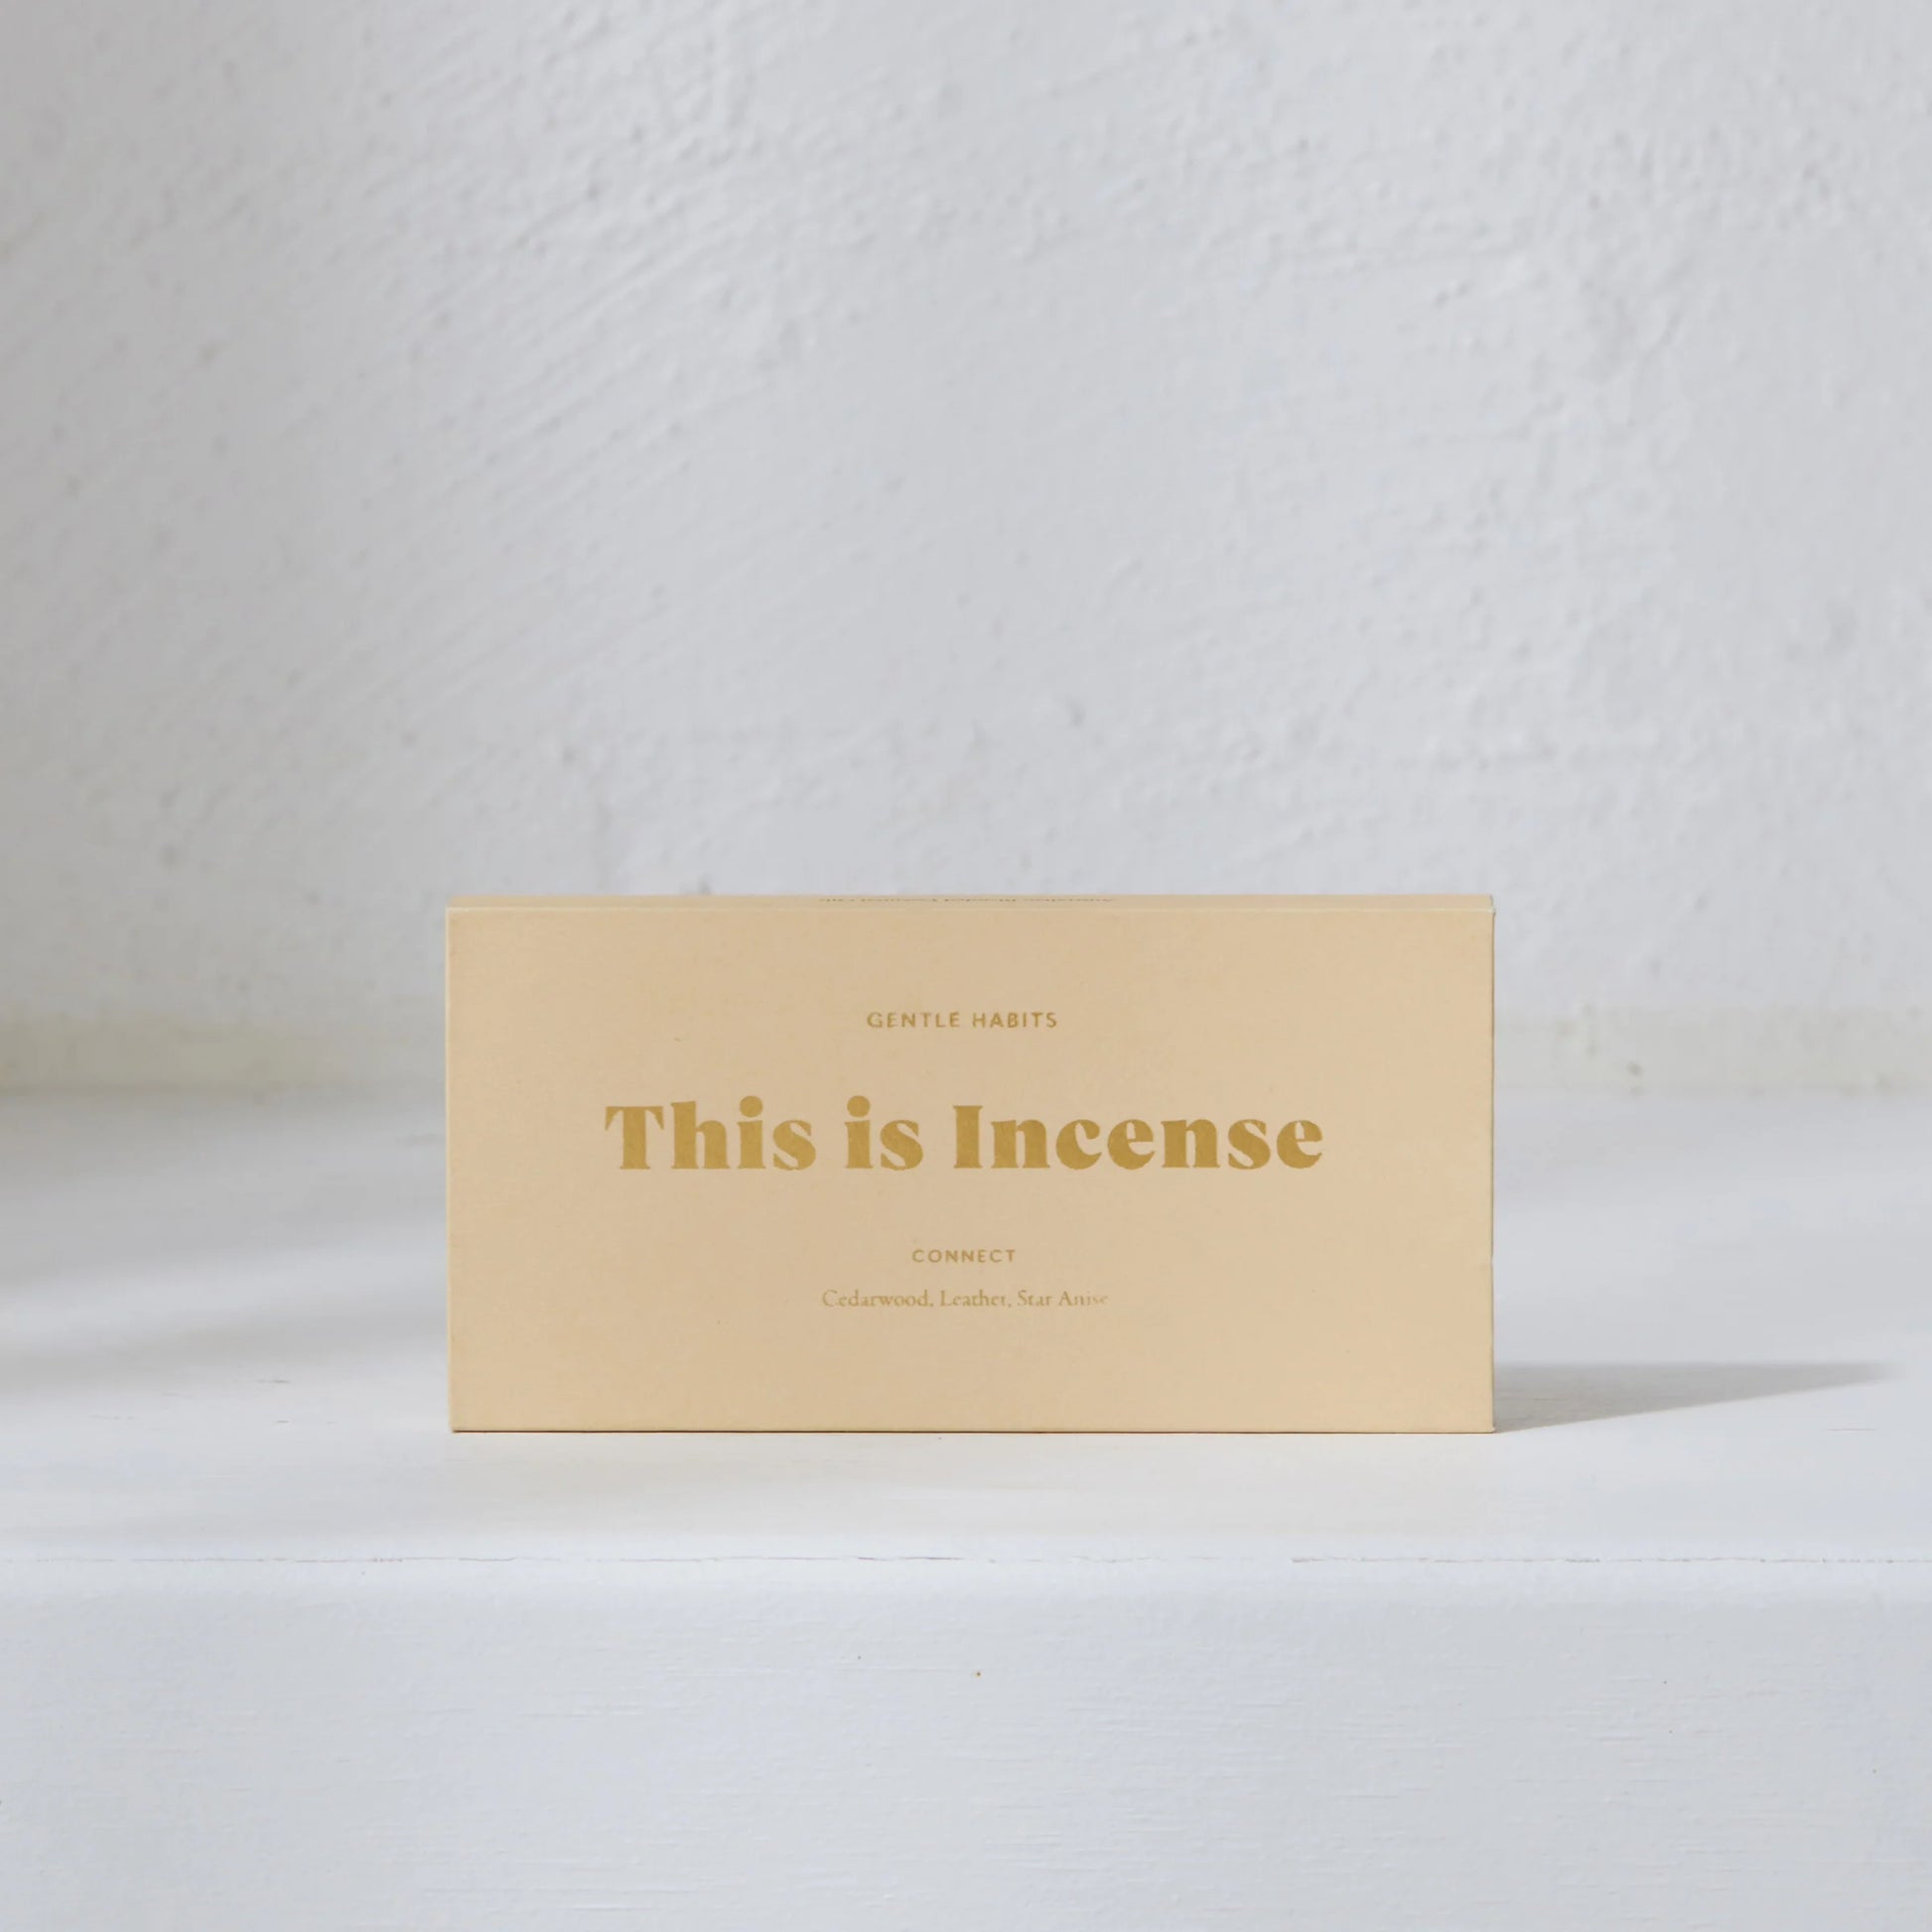 This Is Incense | Connect | GENTLE HABITS | The Ivy Plant Studio